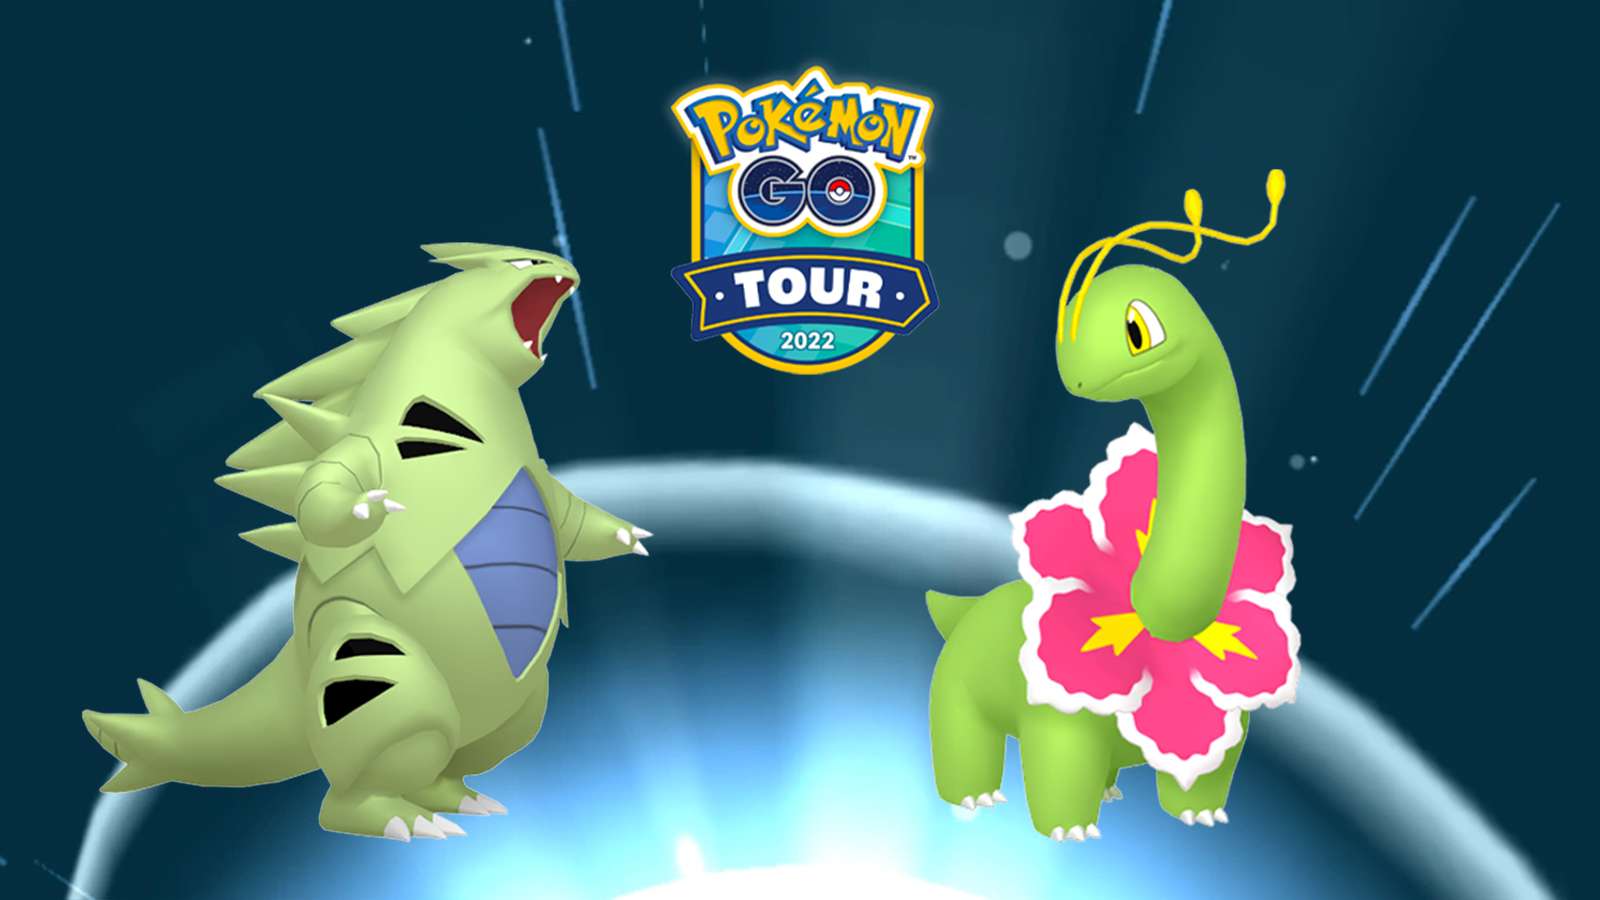 Tyranitar and Meganium with the best exclusive moves in Pokemon Go Tour Johto